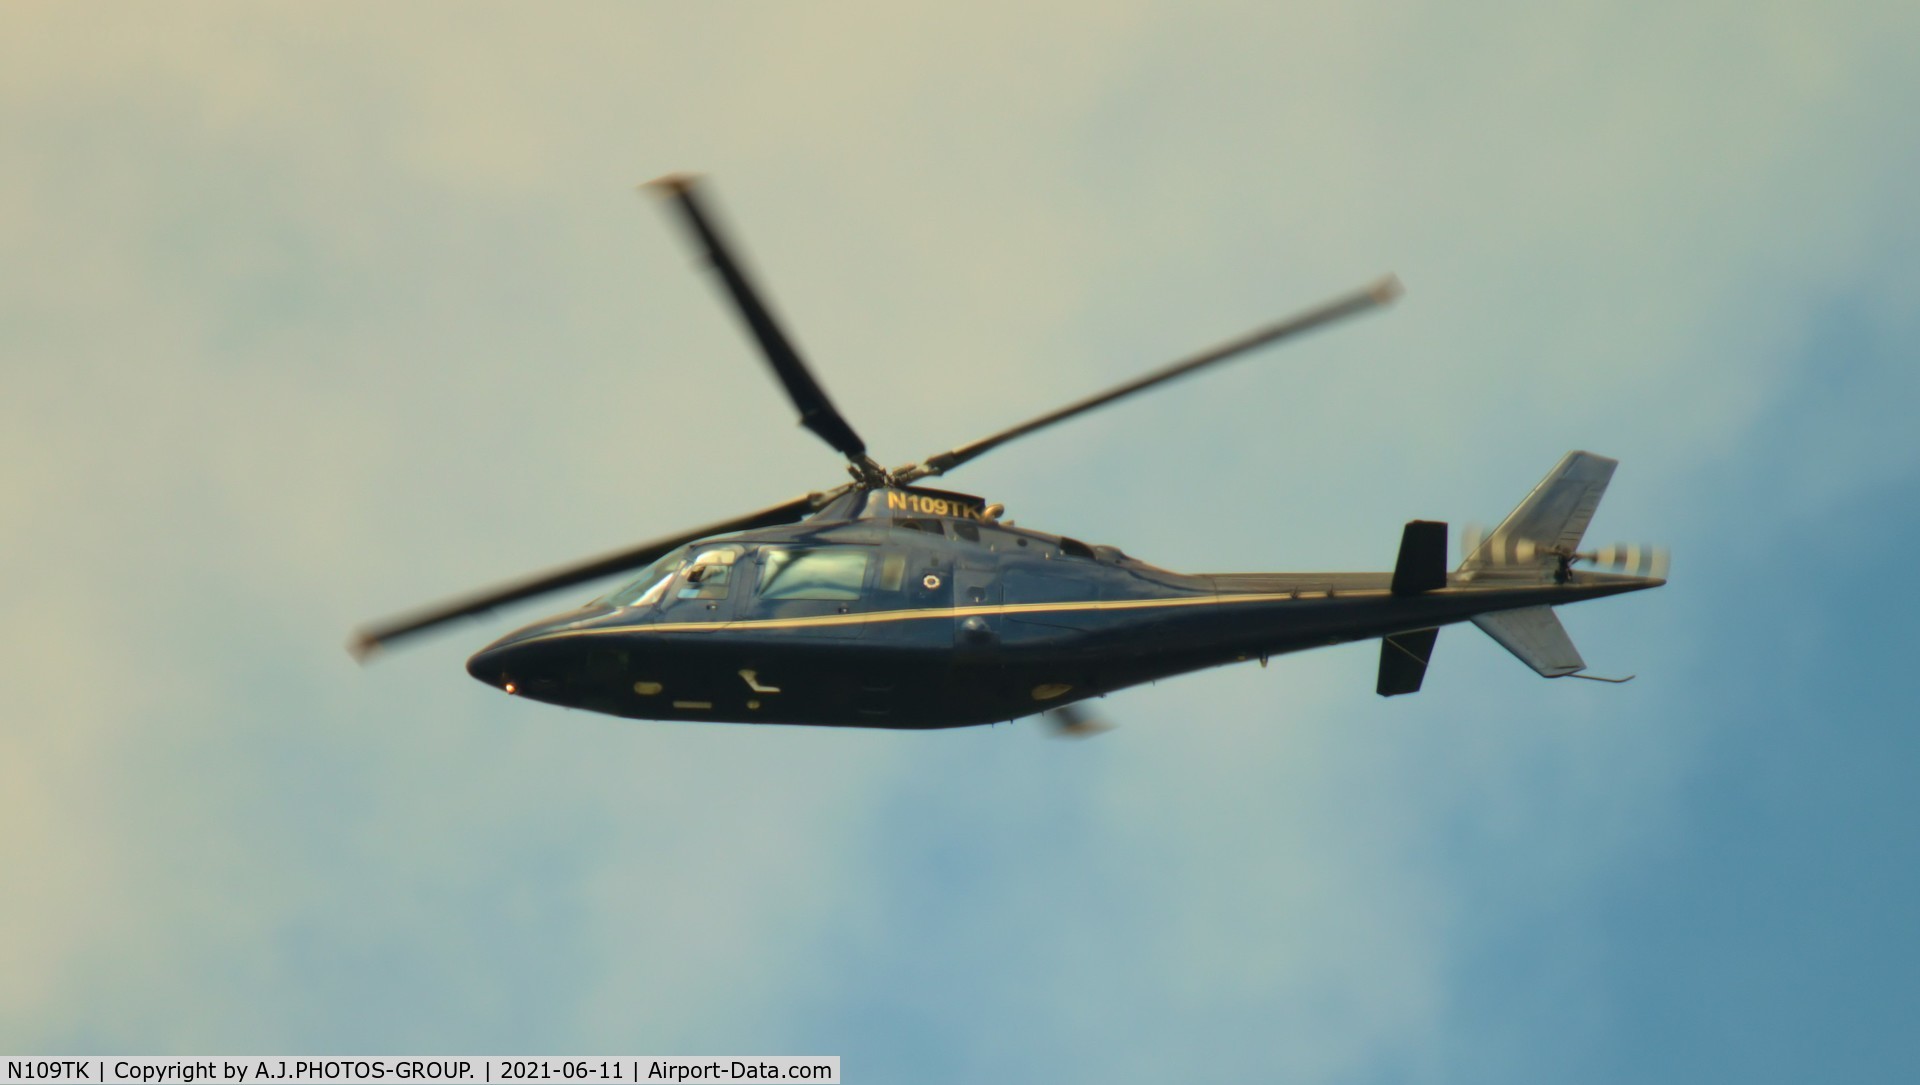 N109TK, 1991 Agusta A-109C C/N 7650, flew passed my front room window at home poss inb to barton for fuel?.